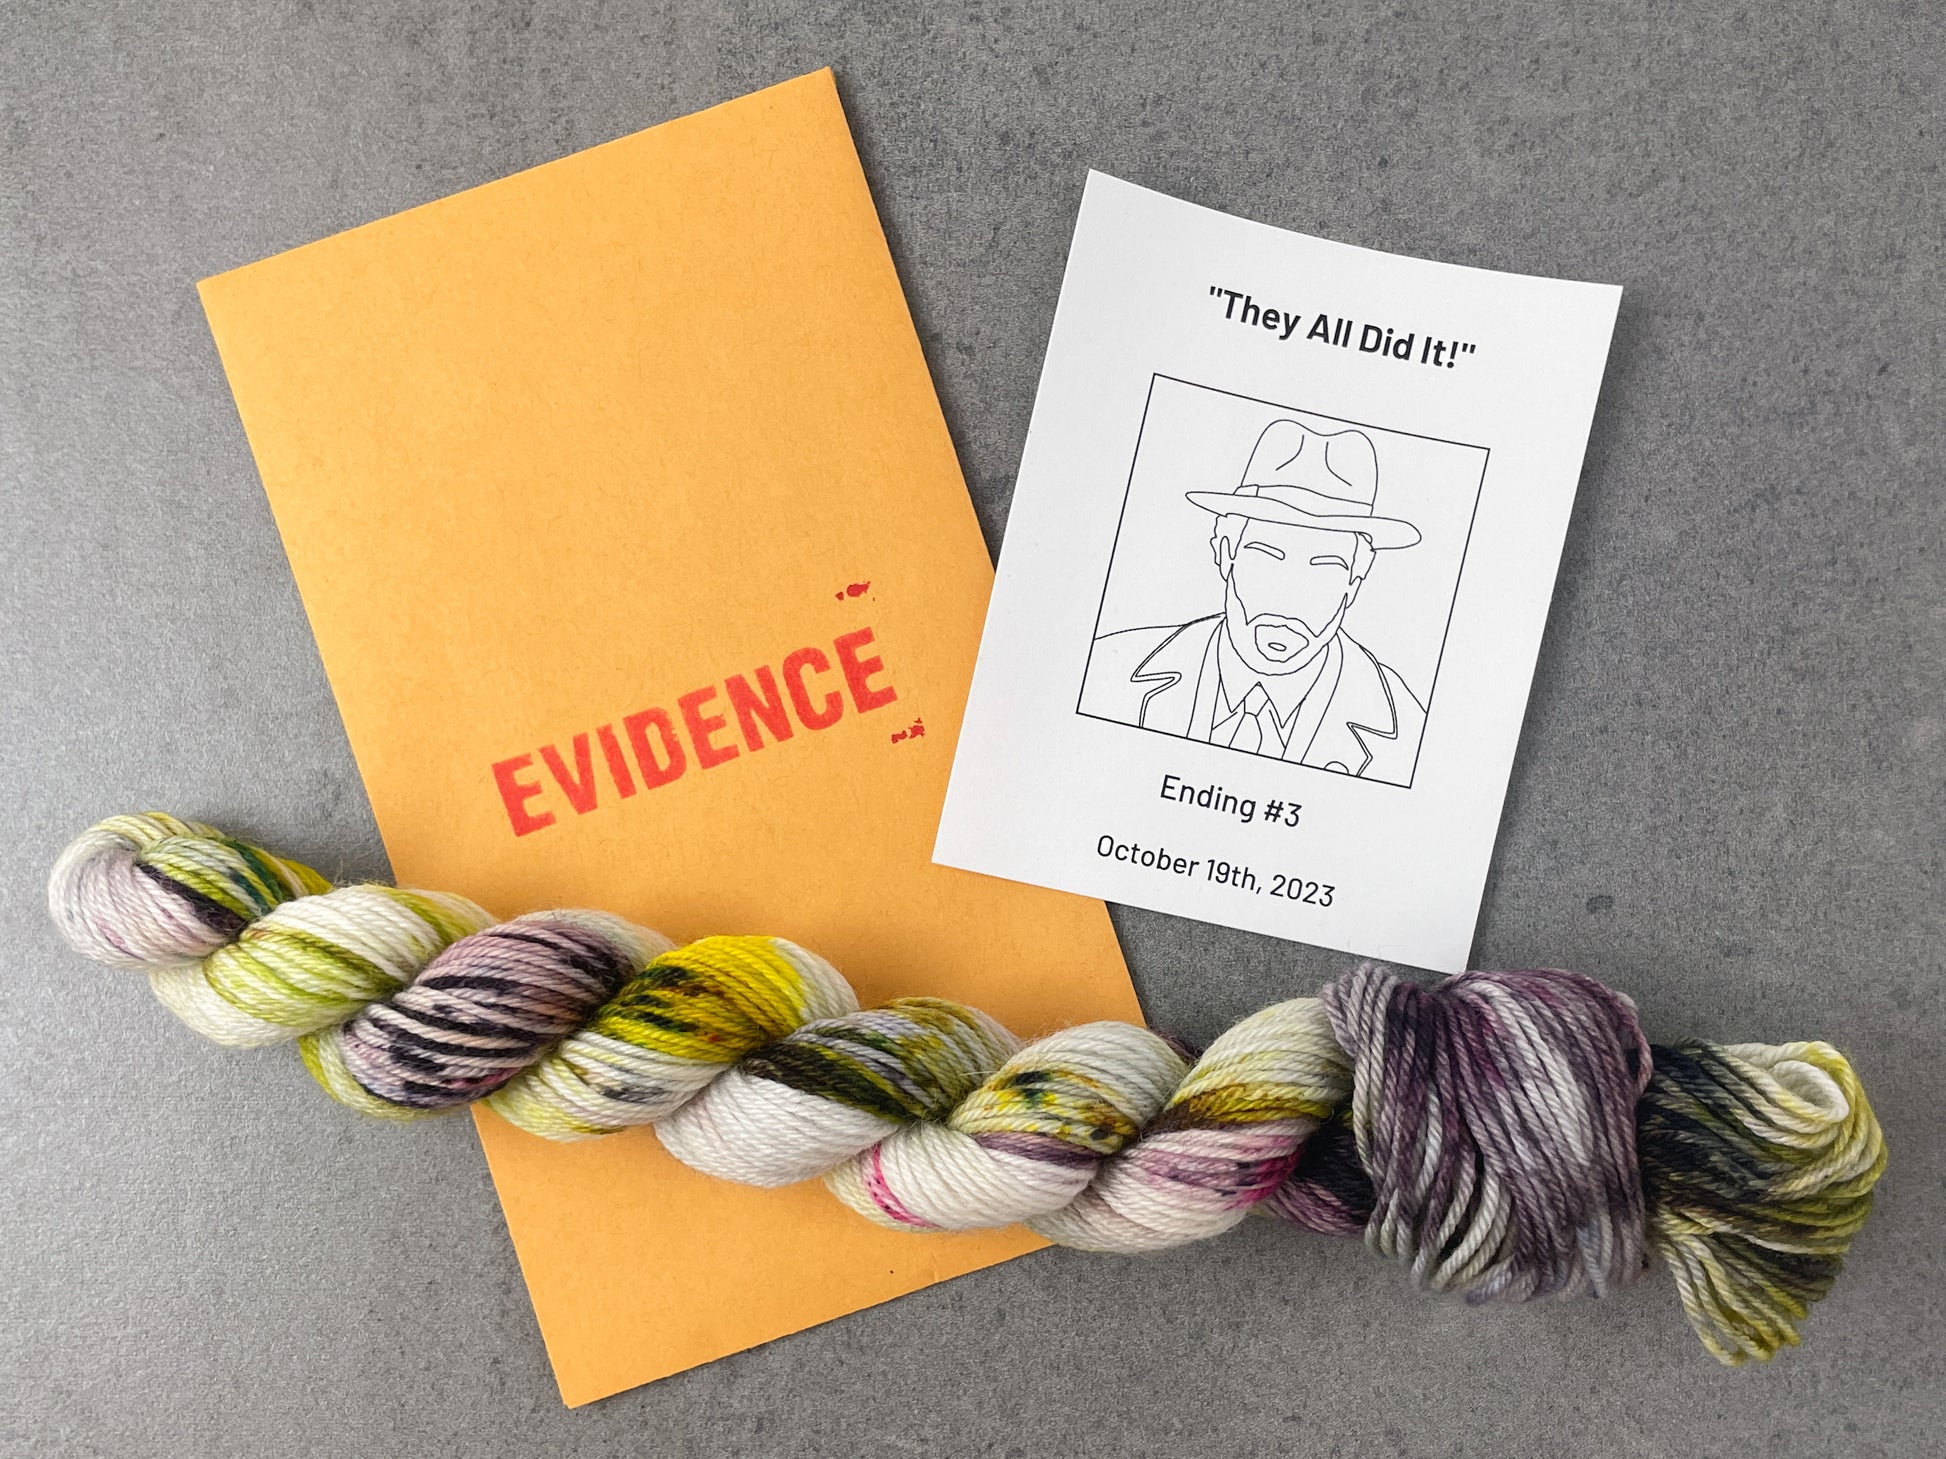 A white, purple, yellow, and green skein of yarn on top of an envelope stamped with "Evidence" and a card with a drawing of the FBI official on it.